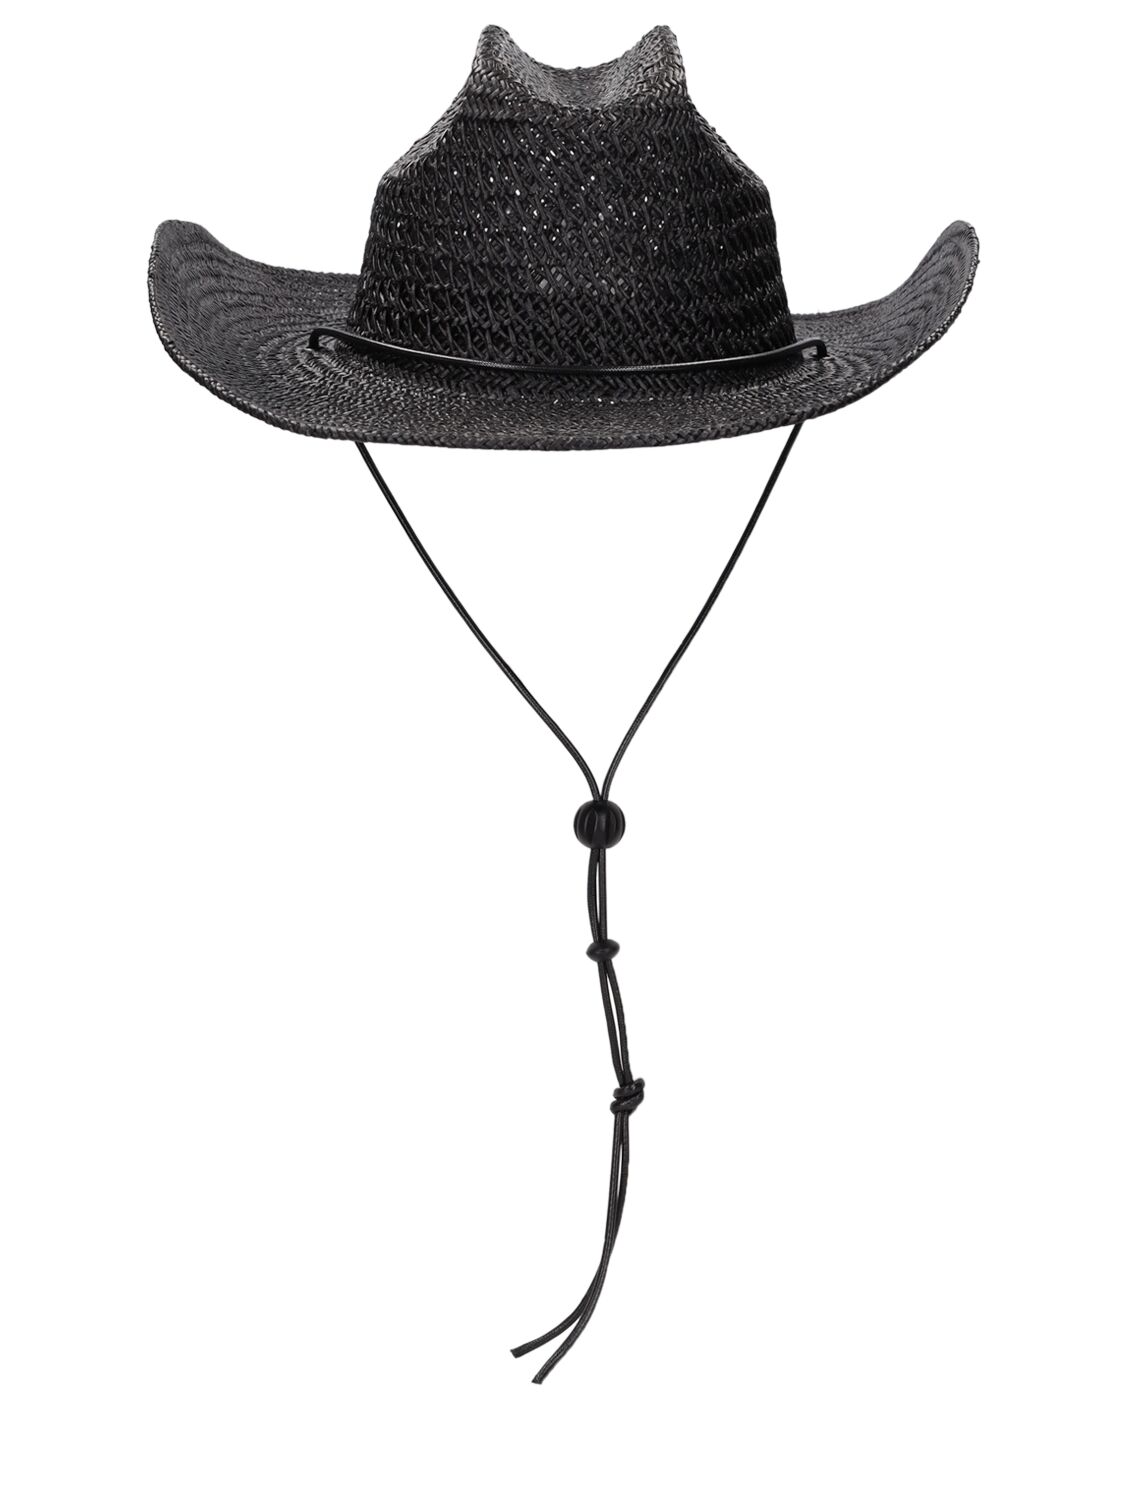 The Outlaw Ii Straw Hat